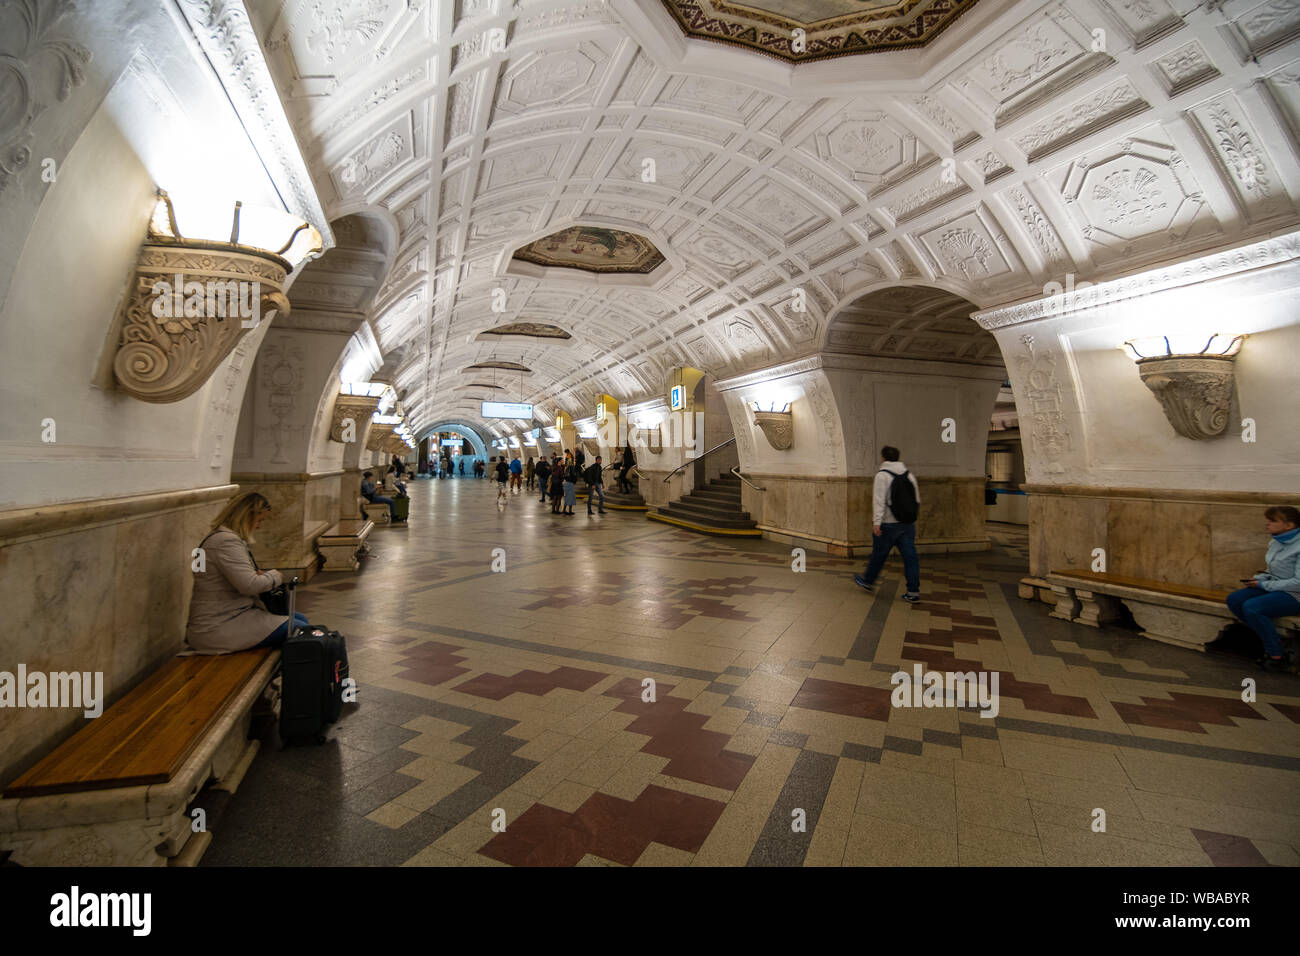 MOSCOW, RUSSIA - AUGUST 2, 2019:  Belorusskaya is a station on the Moscow Metro's Koltsevaya line. It is named after the nearby Belorussky Rail Termin Stock Photo